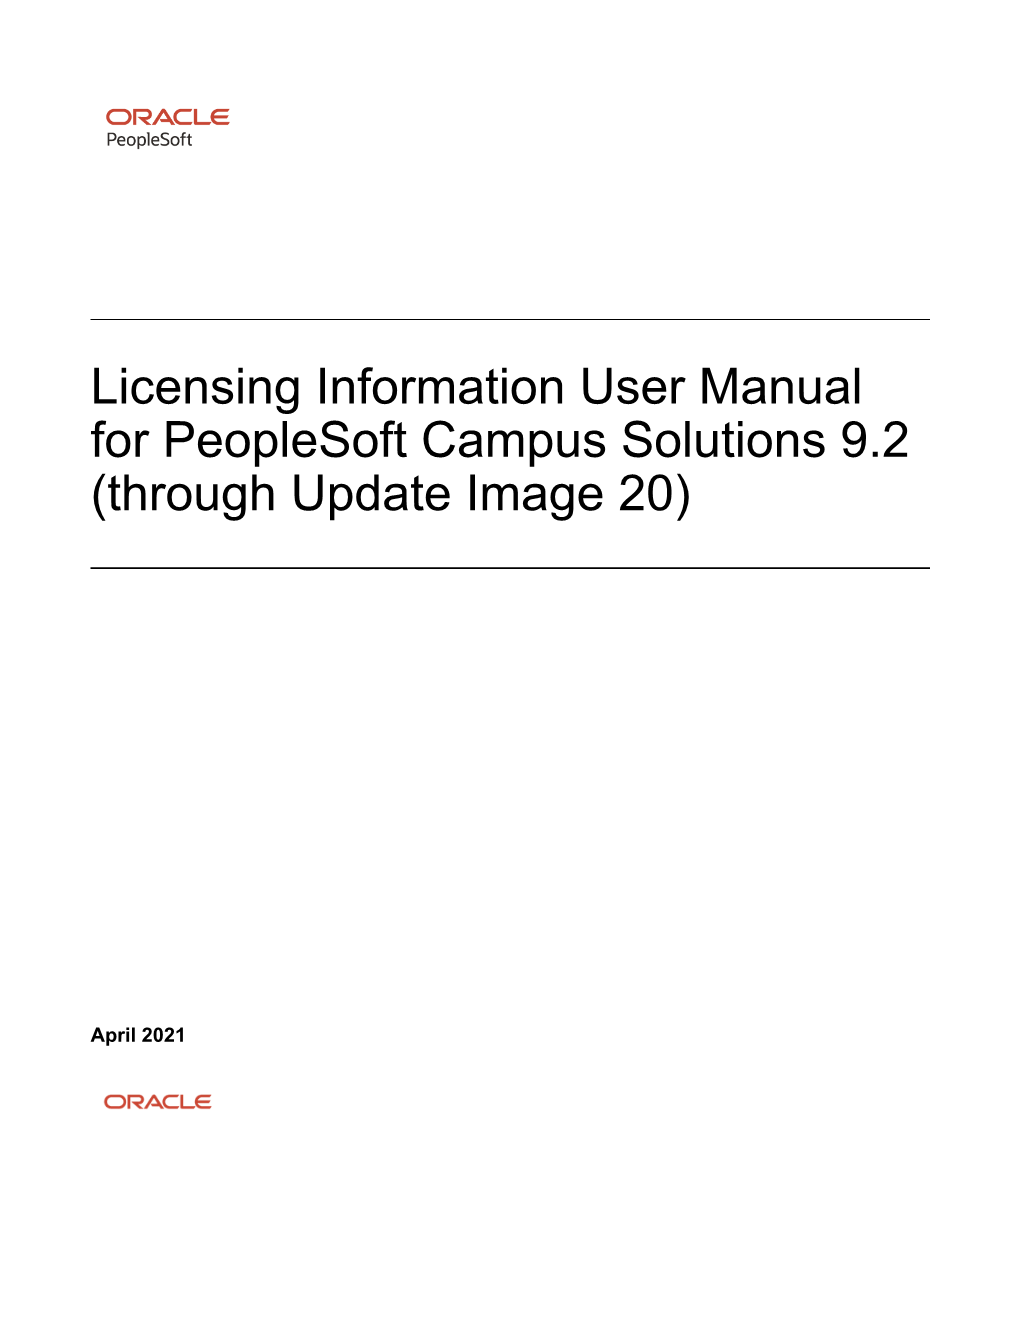 Licensing Information User Manual for Peoplesoft Campus Solutions 9.2 (Through Update Image 20)